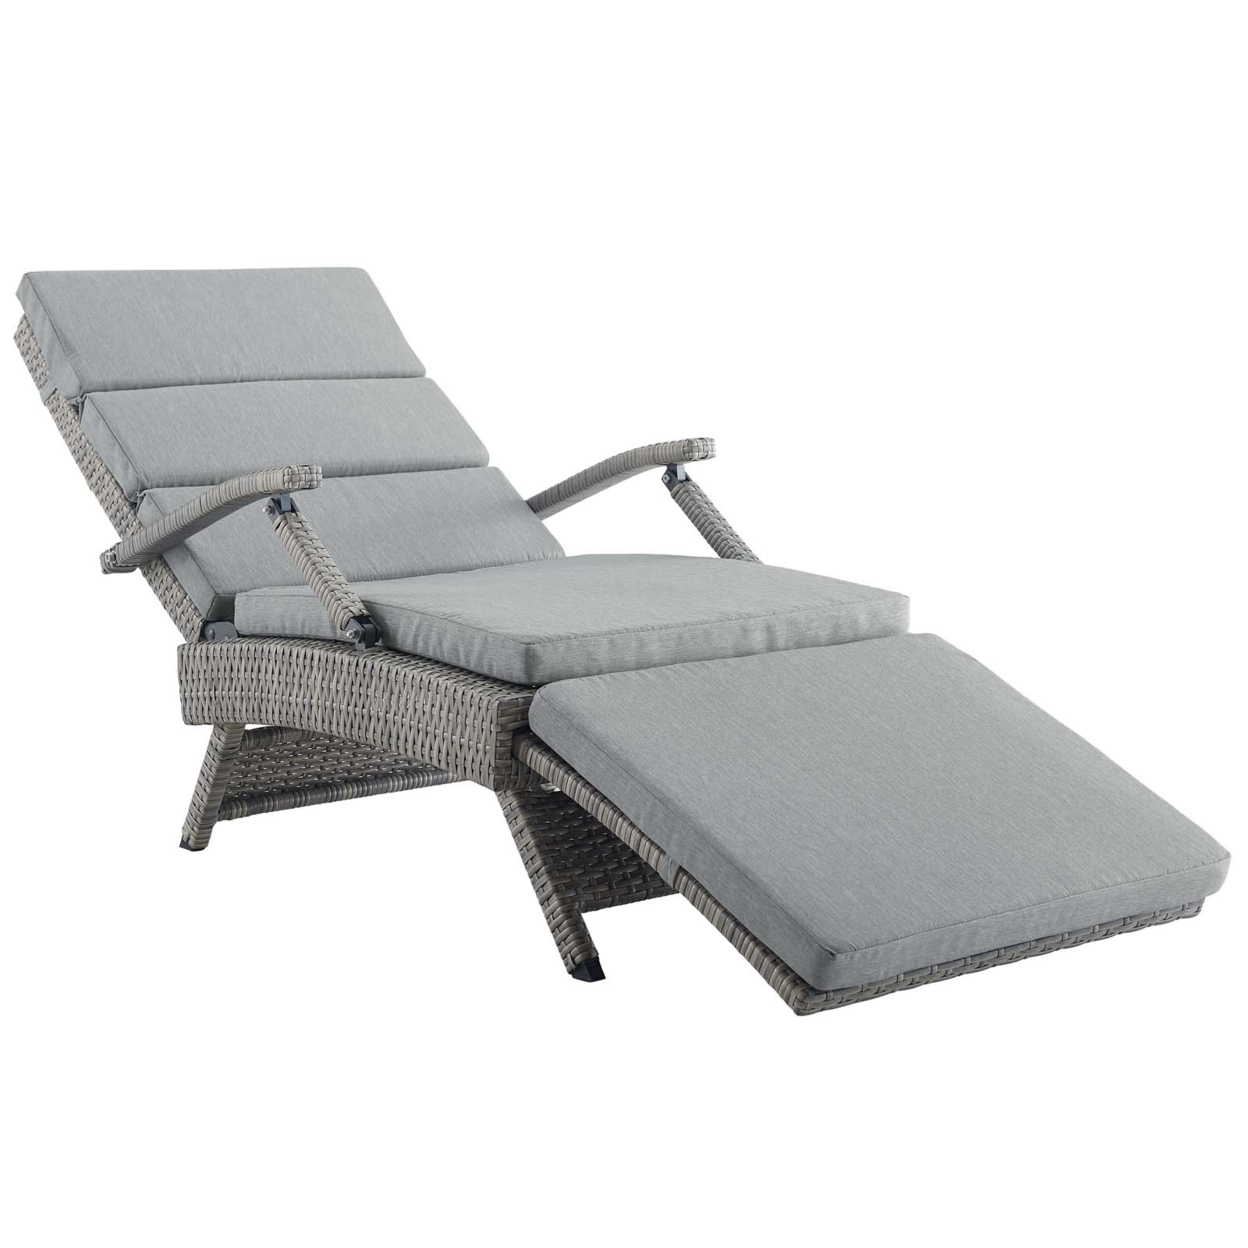 Envisage Chaise Outdoor Patio Wicker Rattan Lounge Chair,Light Gray Gray